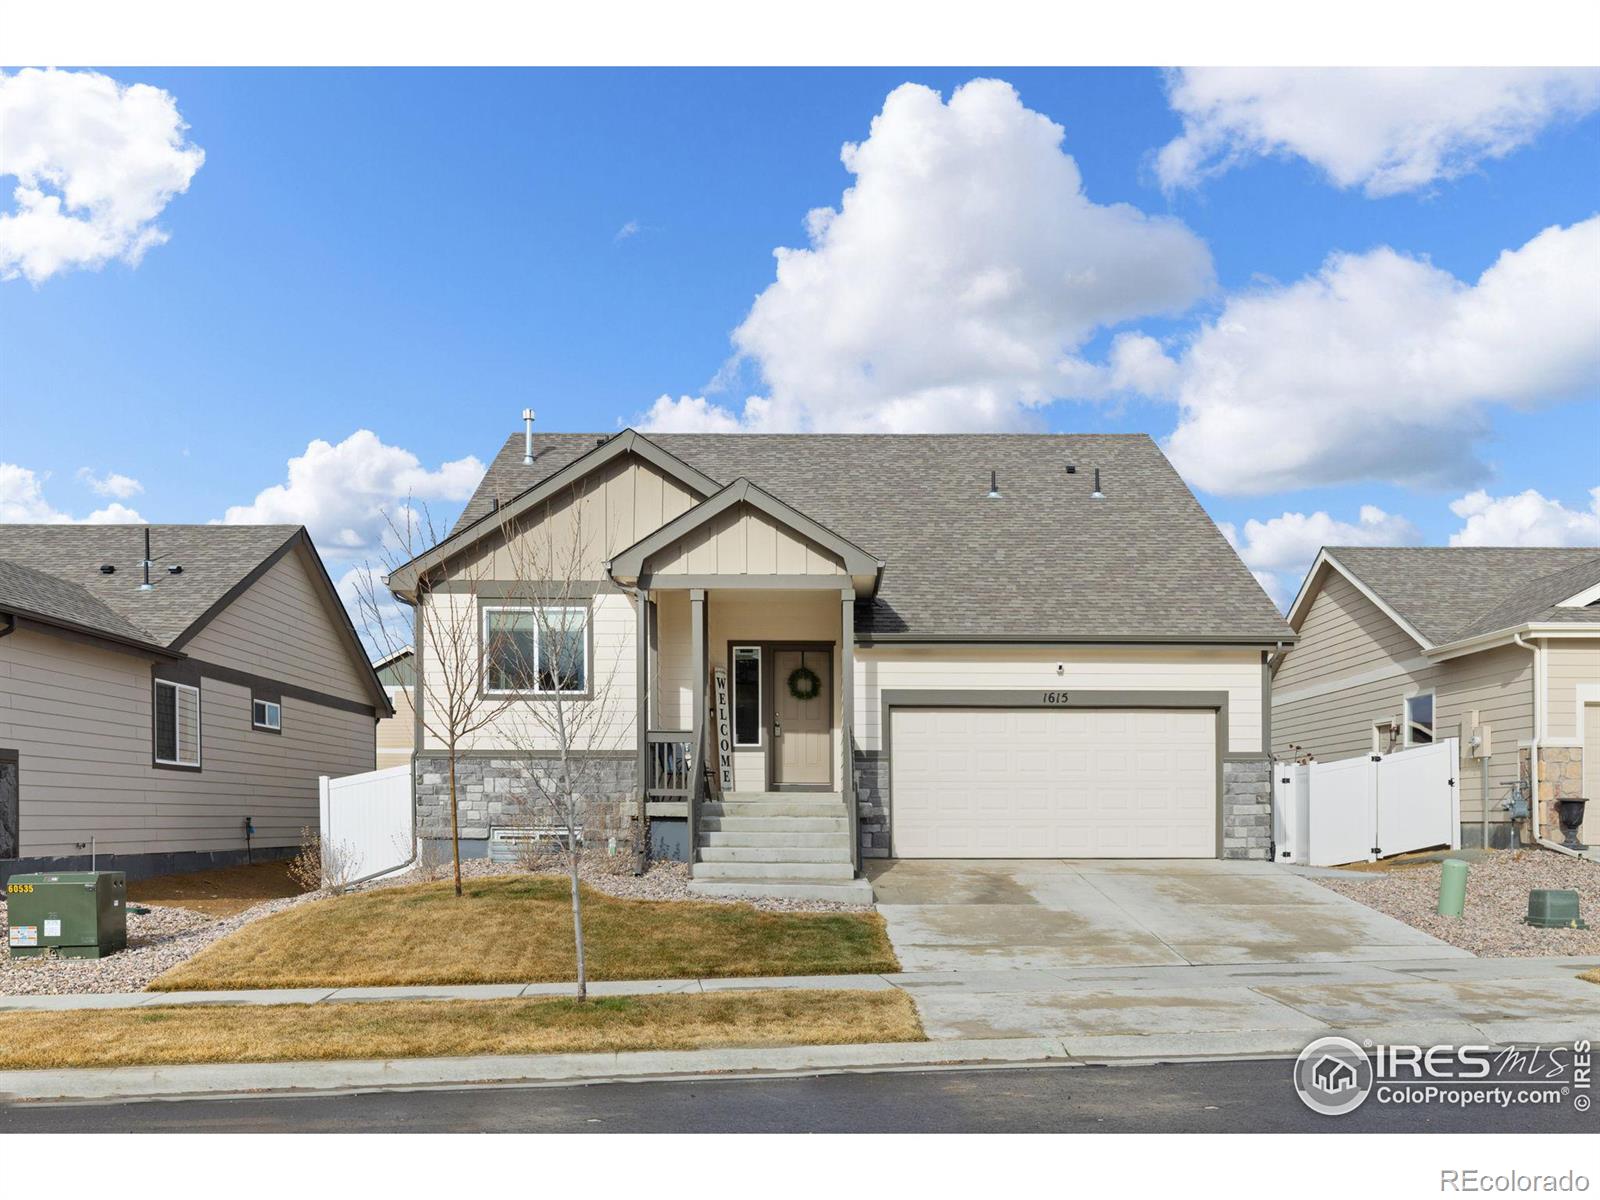 1615  103rd Ave Ct, greeley MLS: 4567891005027 Beds: 3 Baths: 3 Price: $480,000